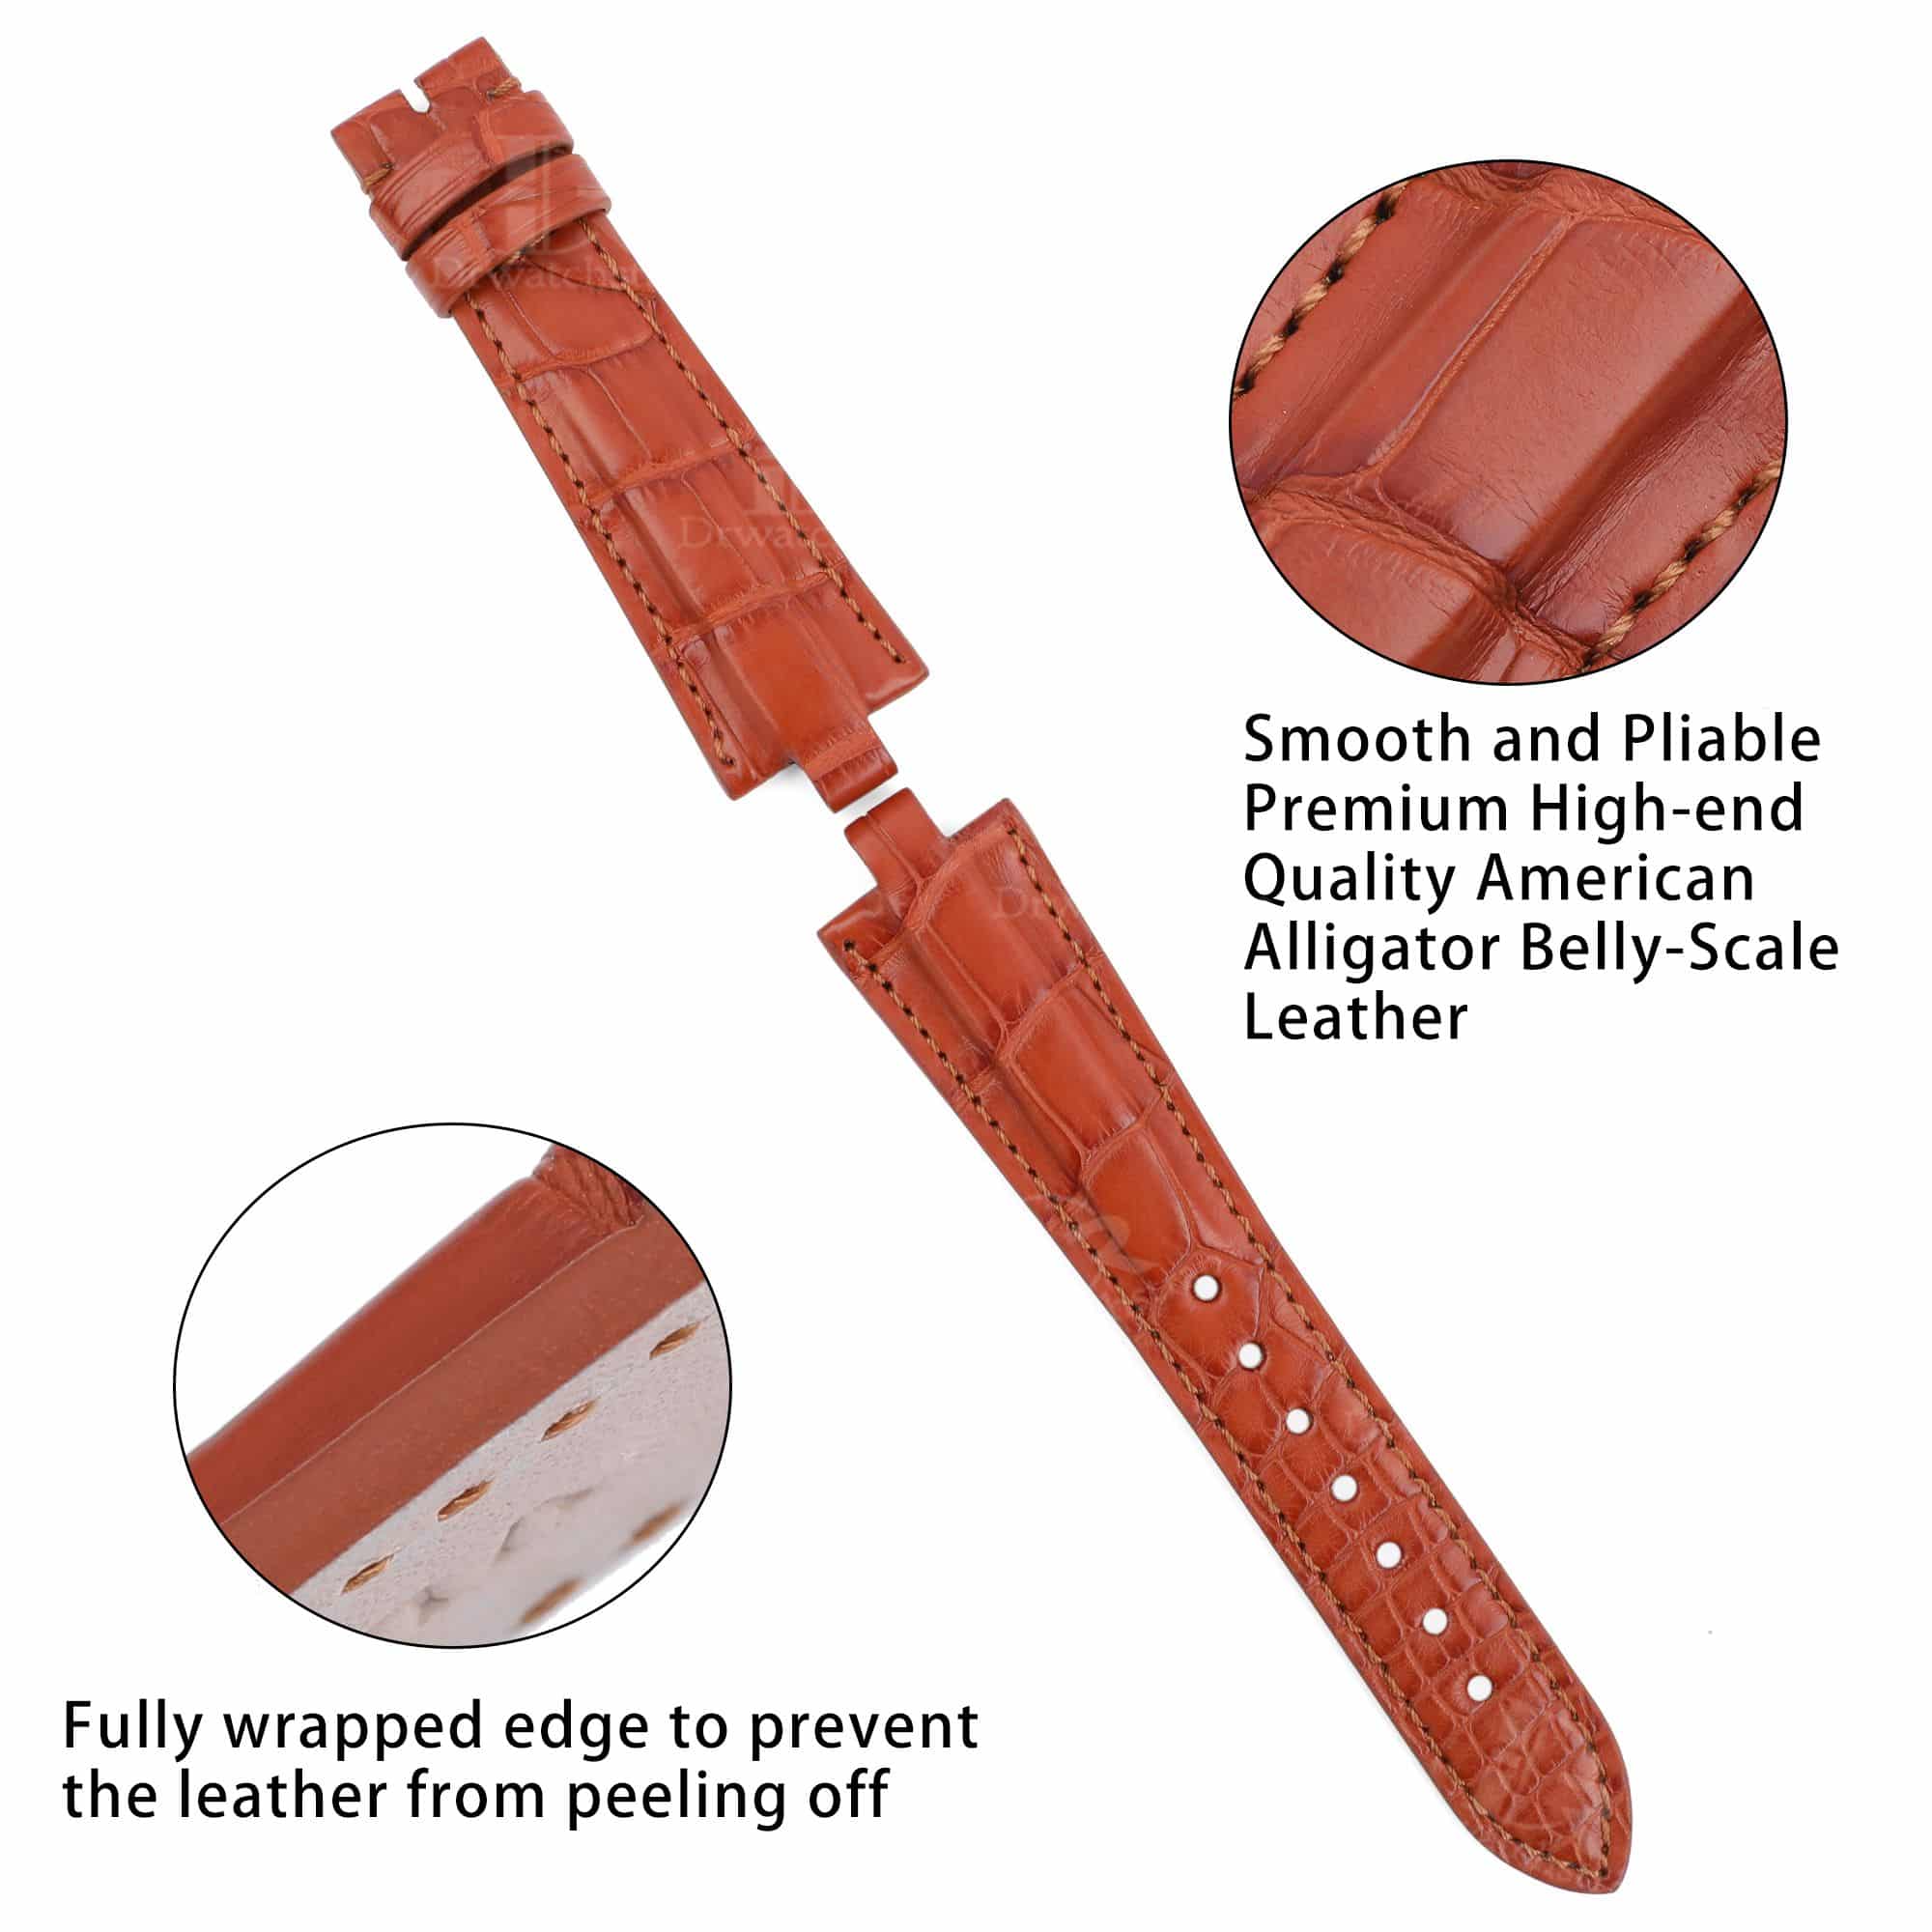 Genuine best quality Belly-scale brown alligator crocodile custom Bvlgari leather watch strap & watch band replacement for Bvlgari Diagono Aluminium AL38A L3276 mens and women's luxury watch - OEM aftermarket high-end straps and watch bands online at a low price from dr watchstrap